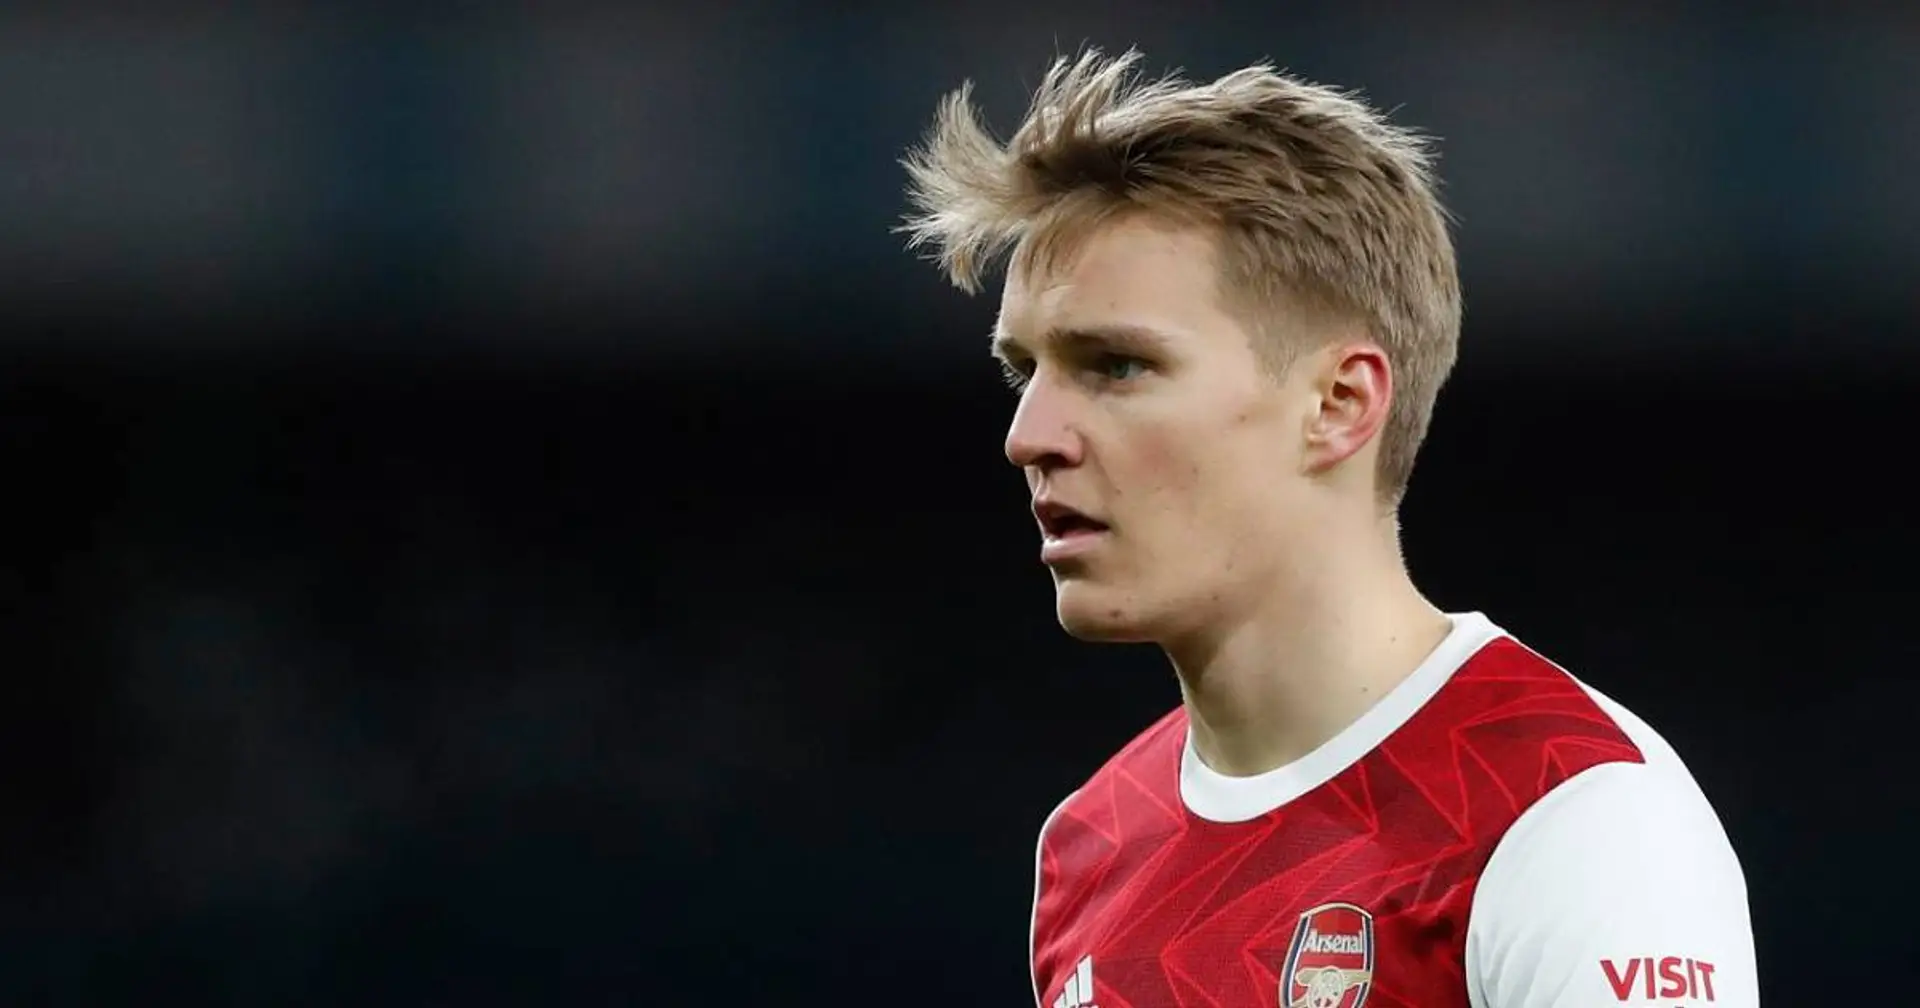 'Mortgage the club for Odegaard': global Arsenal community in overdrive after Ode's performance